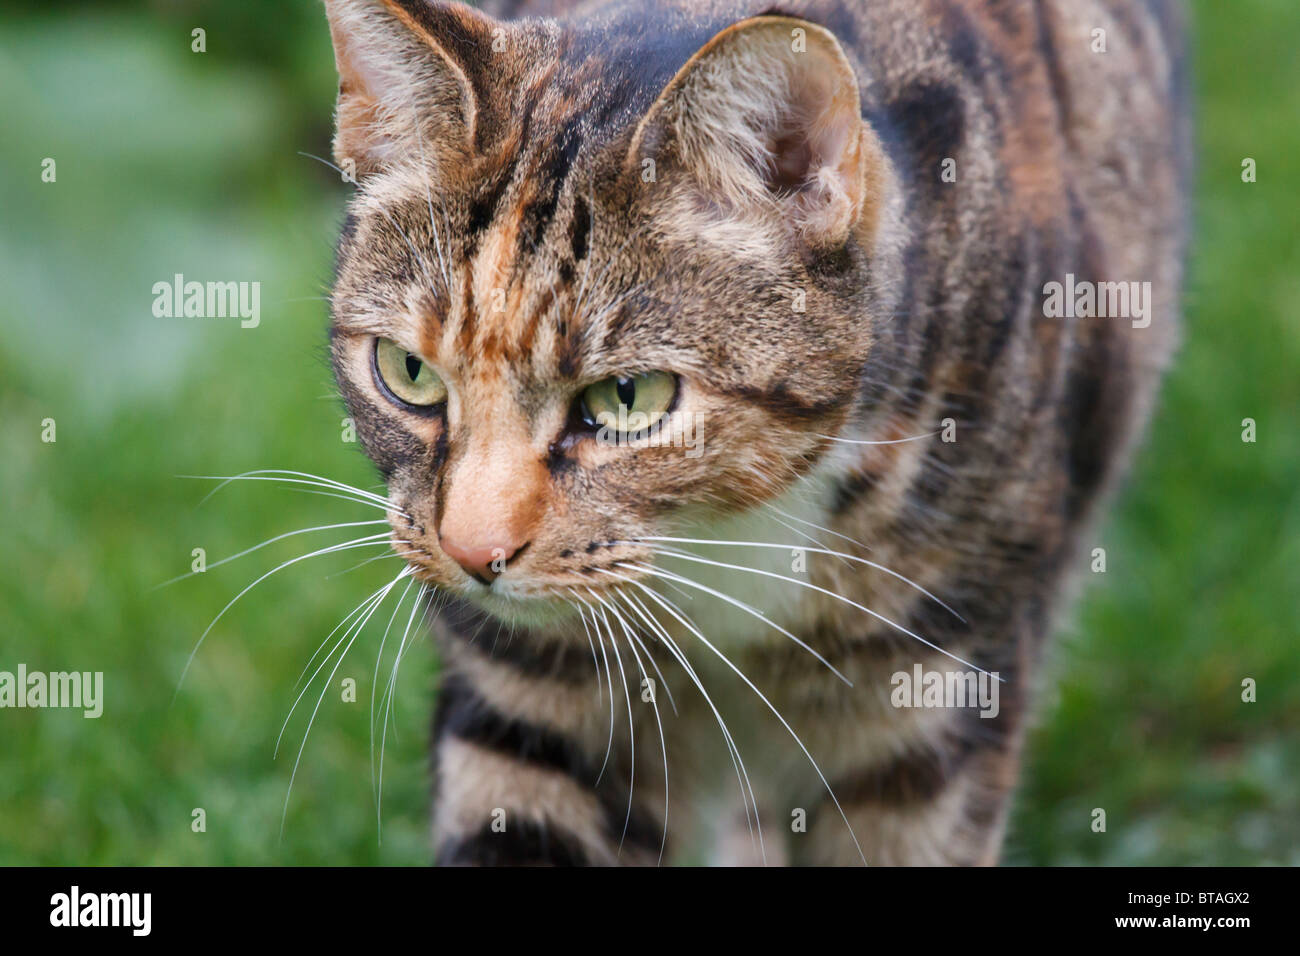 Close up of the face of a female black and brown tabby cat Stock Photo